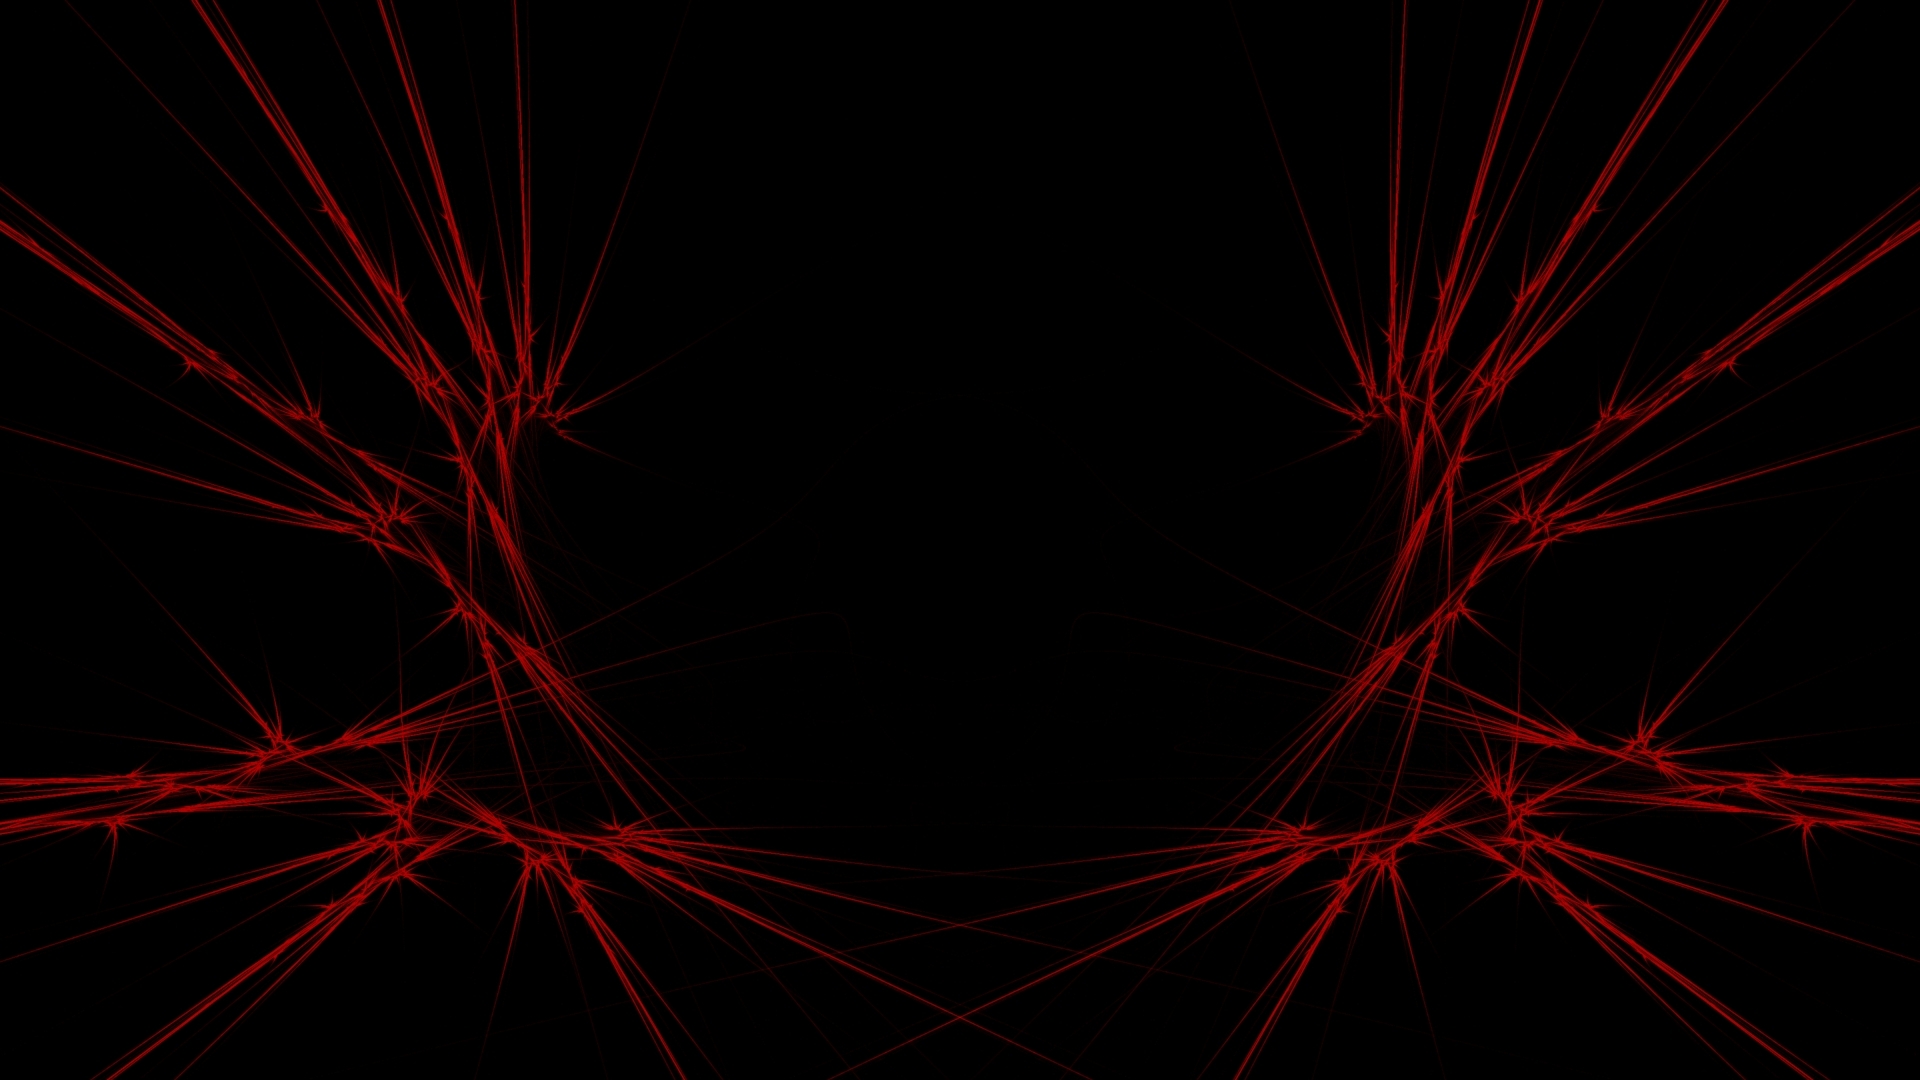 Wallpaper Red Black Abstract Full HD 1080p